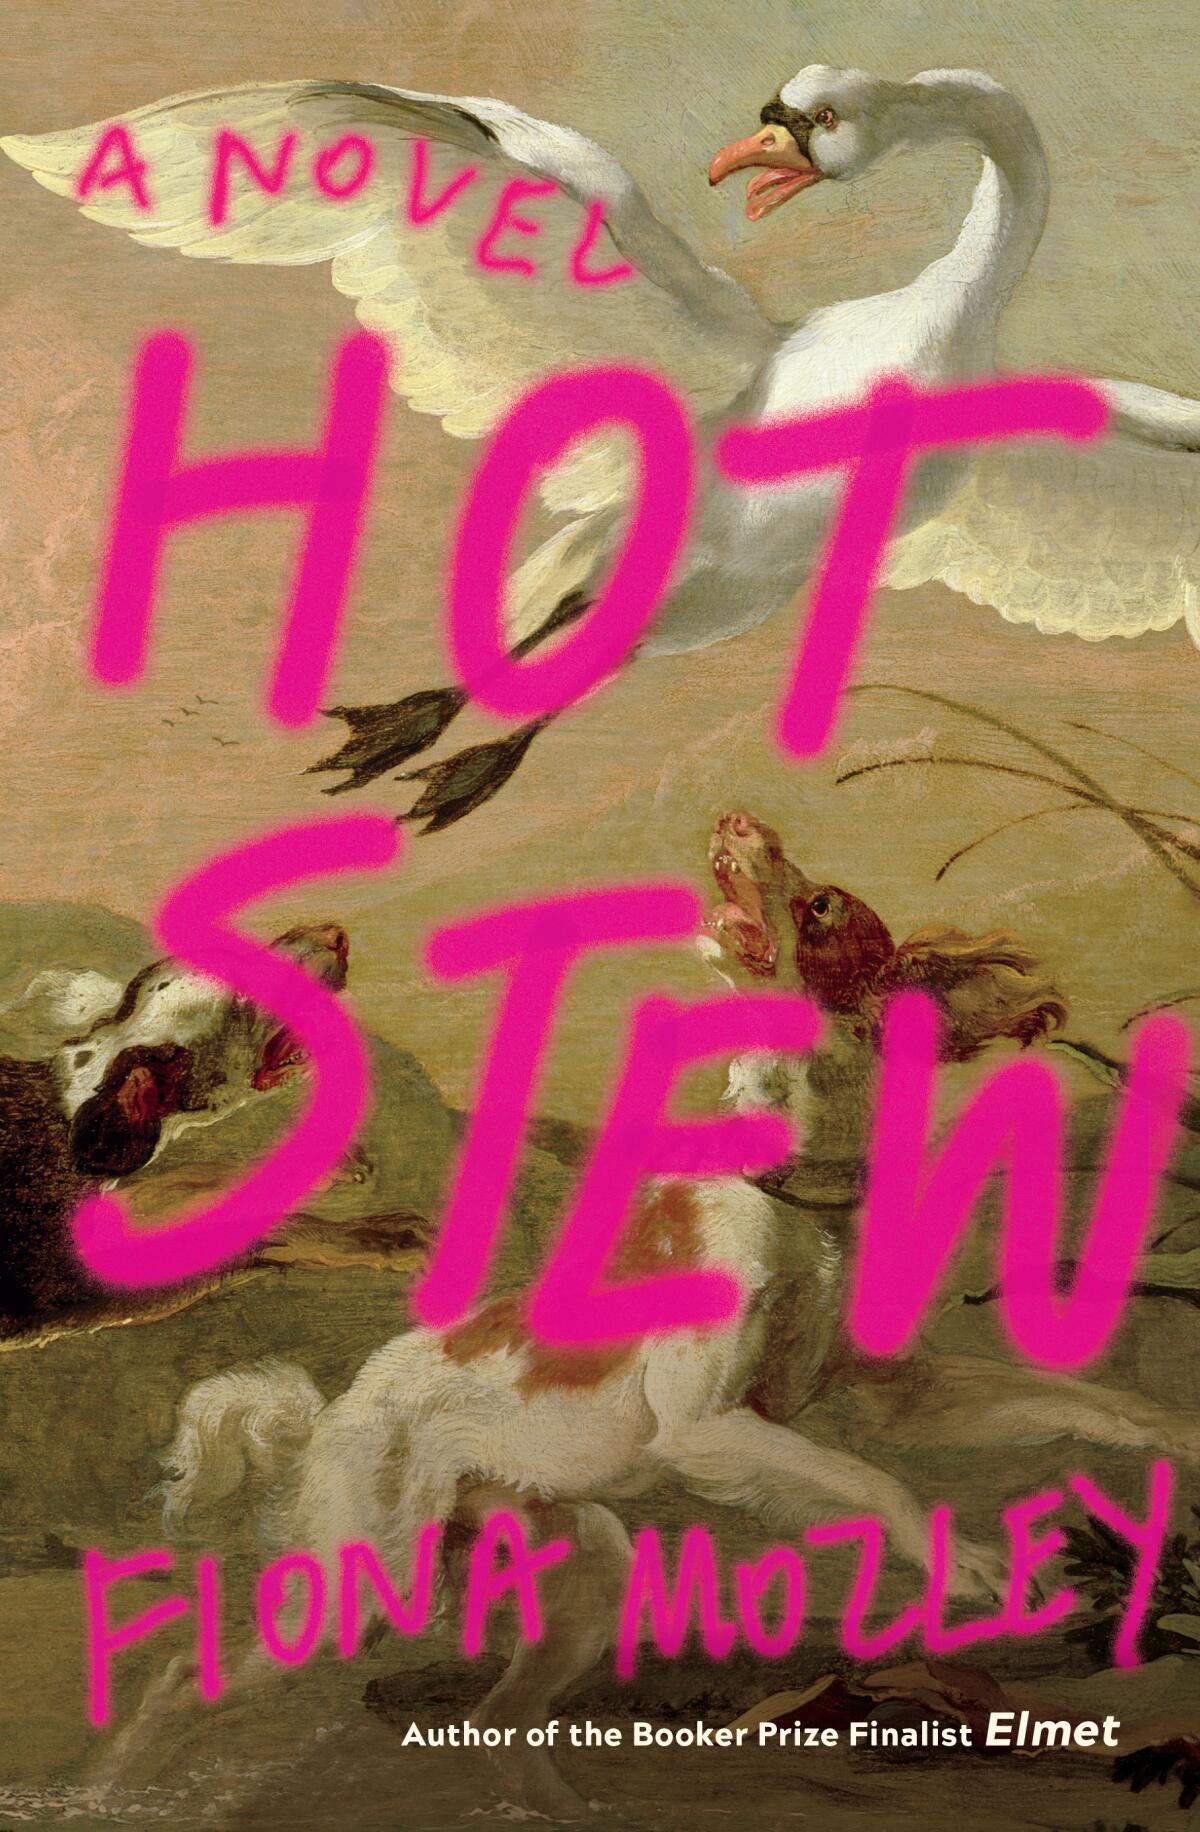 "Hot Stew," by Fiona Mozley